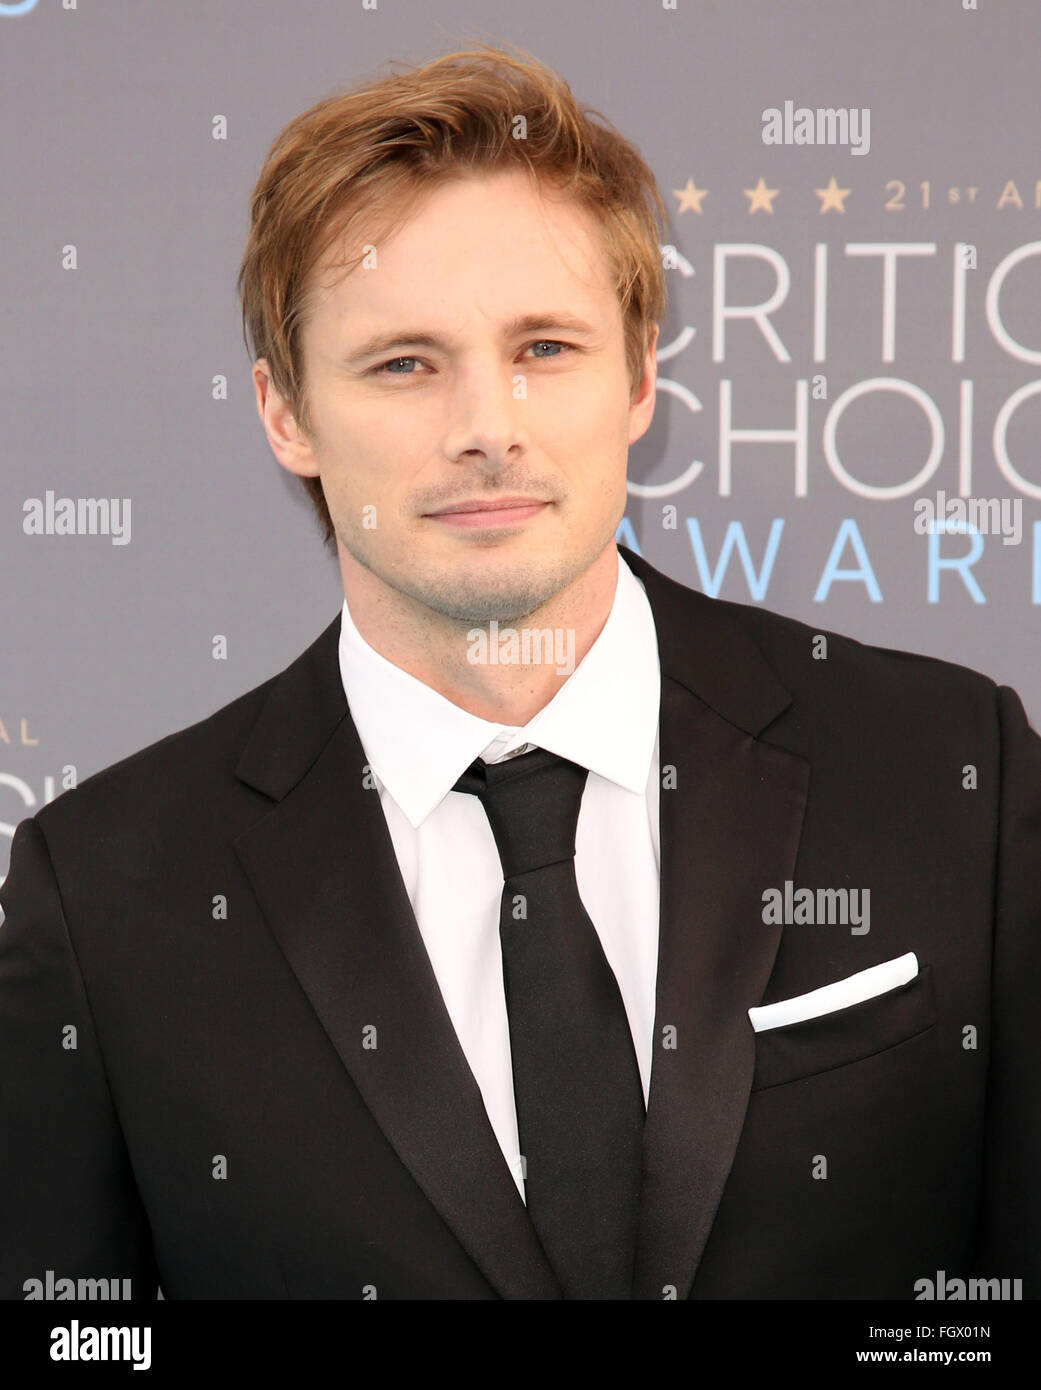 Celebrities attend The 21st Annual Critics’ Choice Awards at Barker Hangar.  Featuring: Bradley James Where: Los Angeles, California, United States When: 17 Jan 2016 Stock Photo